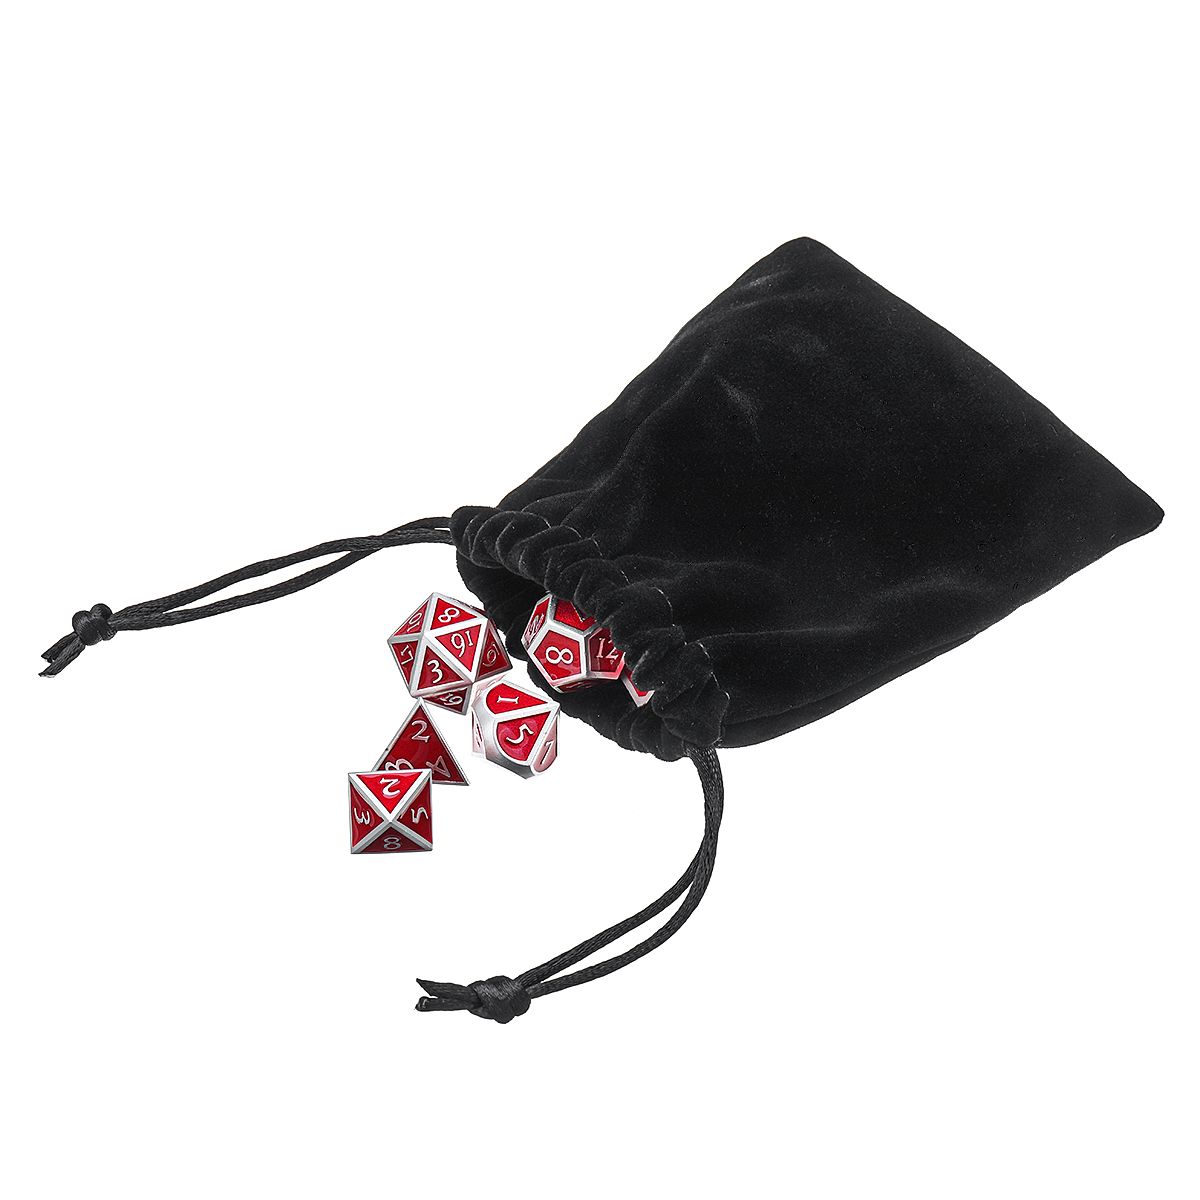 Red-Antique-Color-Solid-Metal-Polyhedral-Dices-Role-Playing-RPG-Gadget-7-Dice-Set-With-Bag-1425967